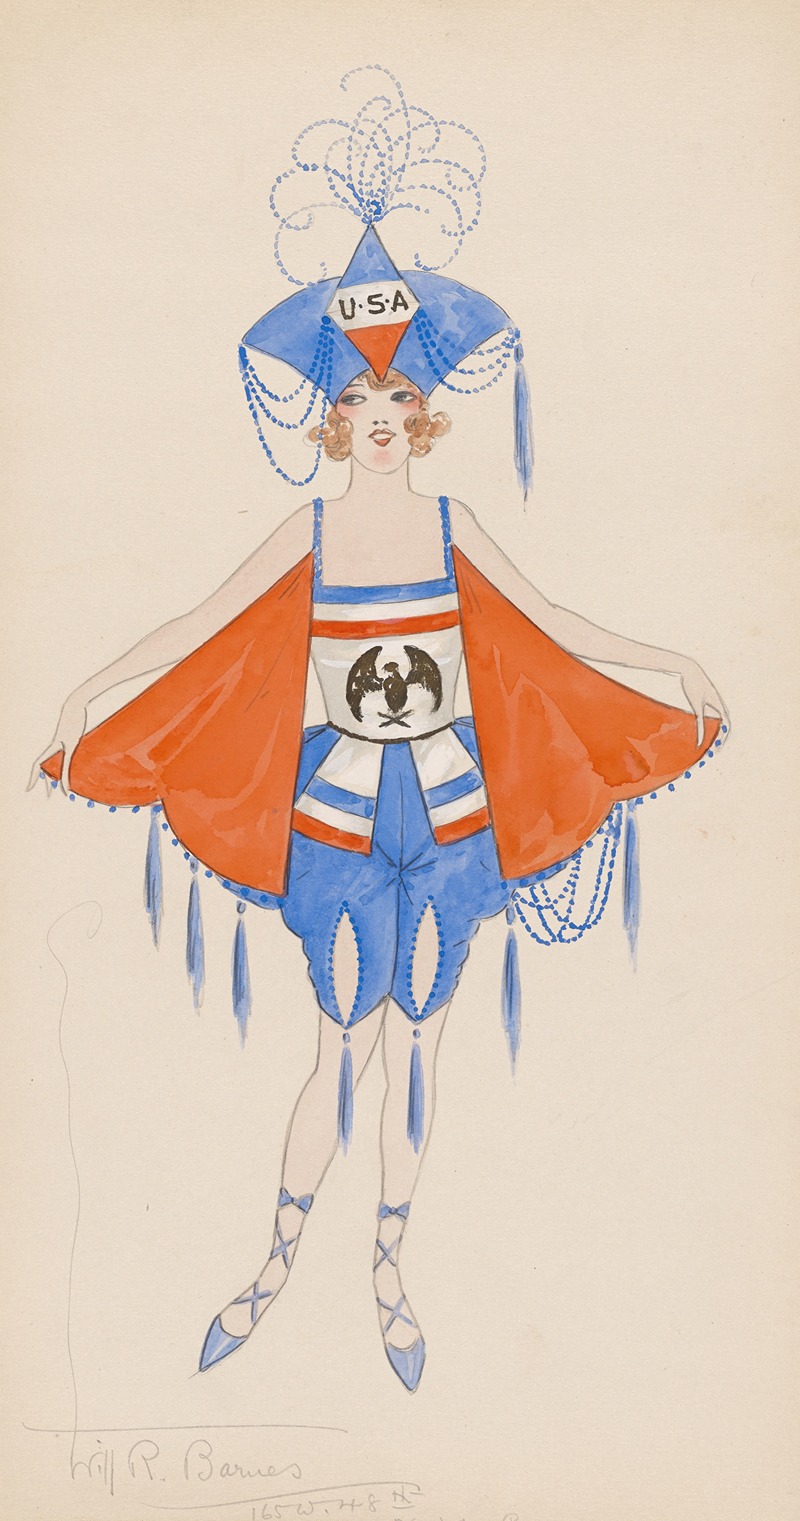 Will R. Barnes - Costume for girls in red, white, and blue